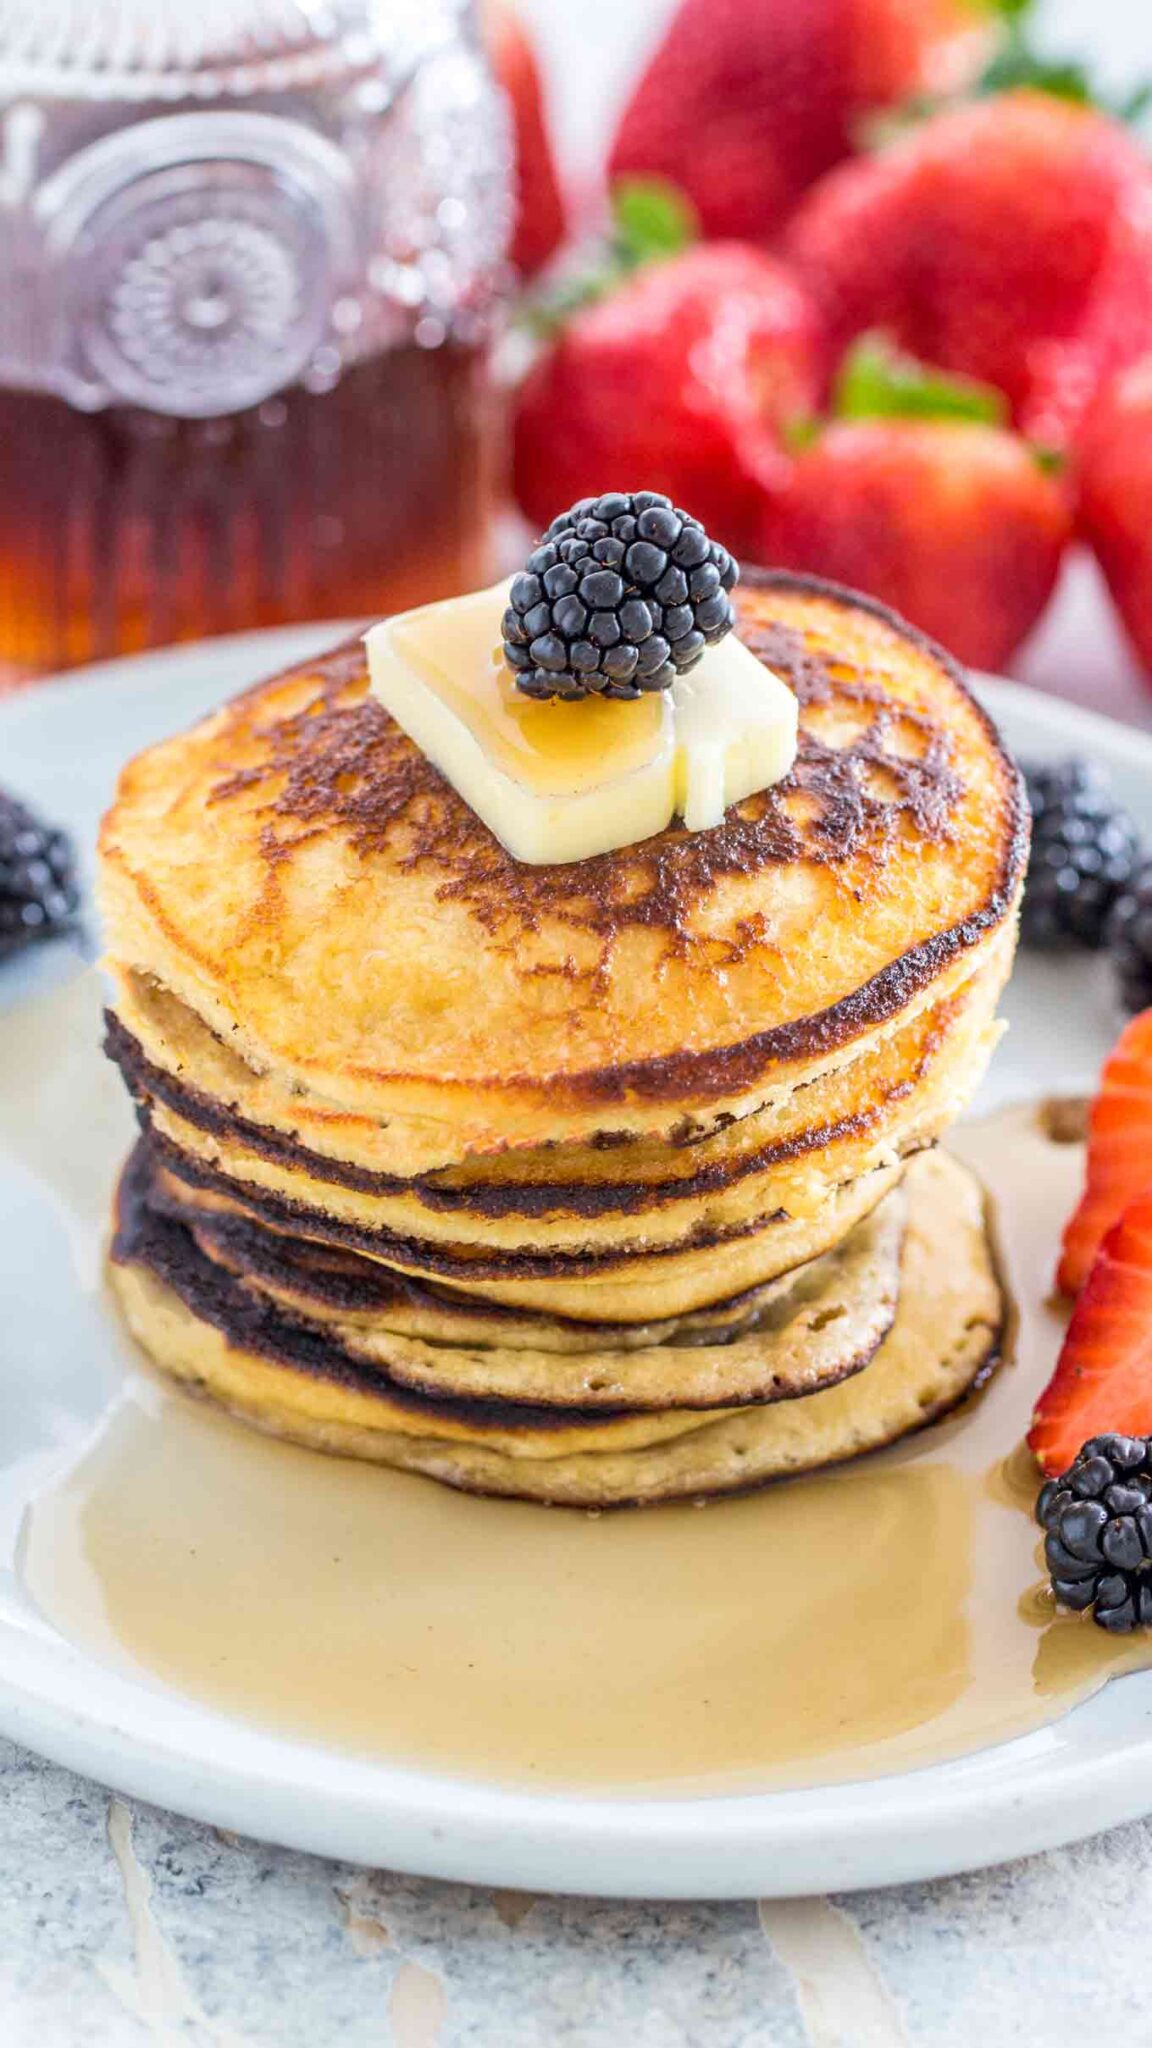 Keto Pancakes - Low Carb [Video] - Sweet and Savory Meals